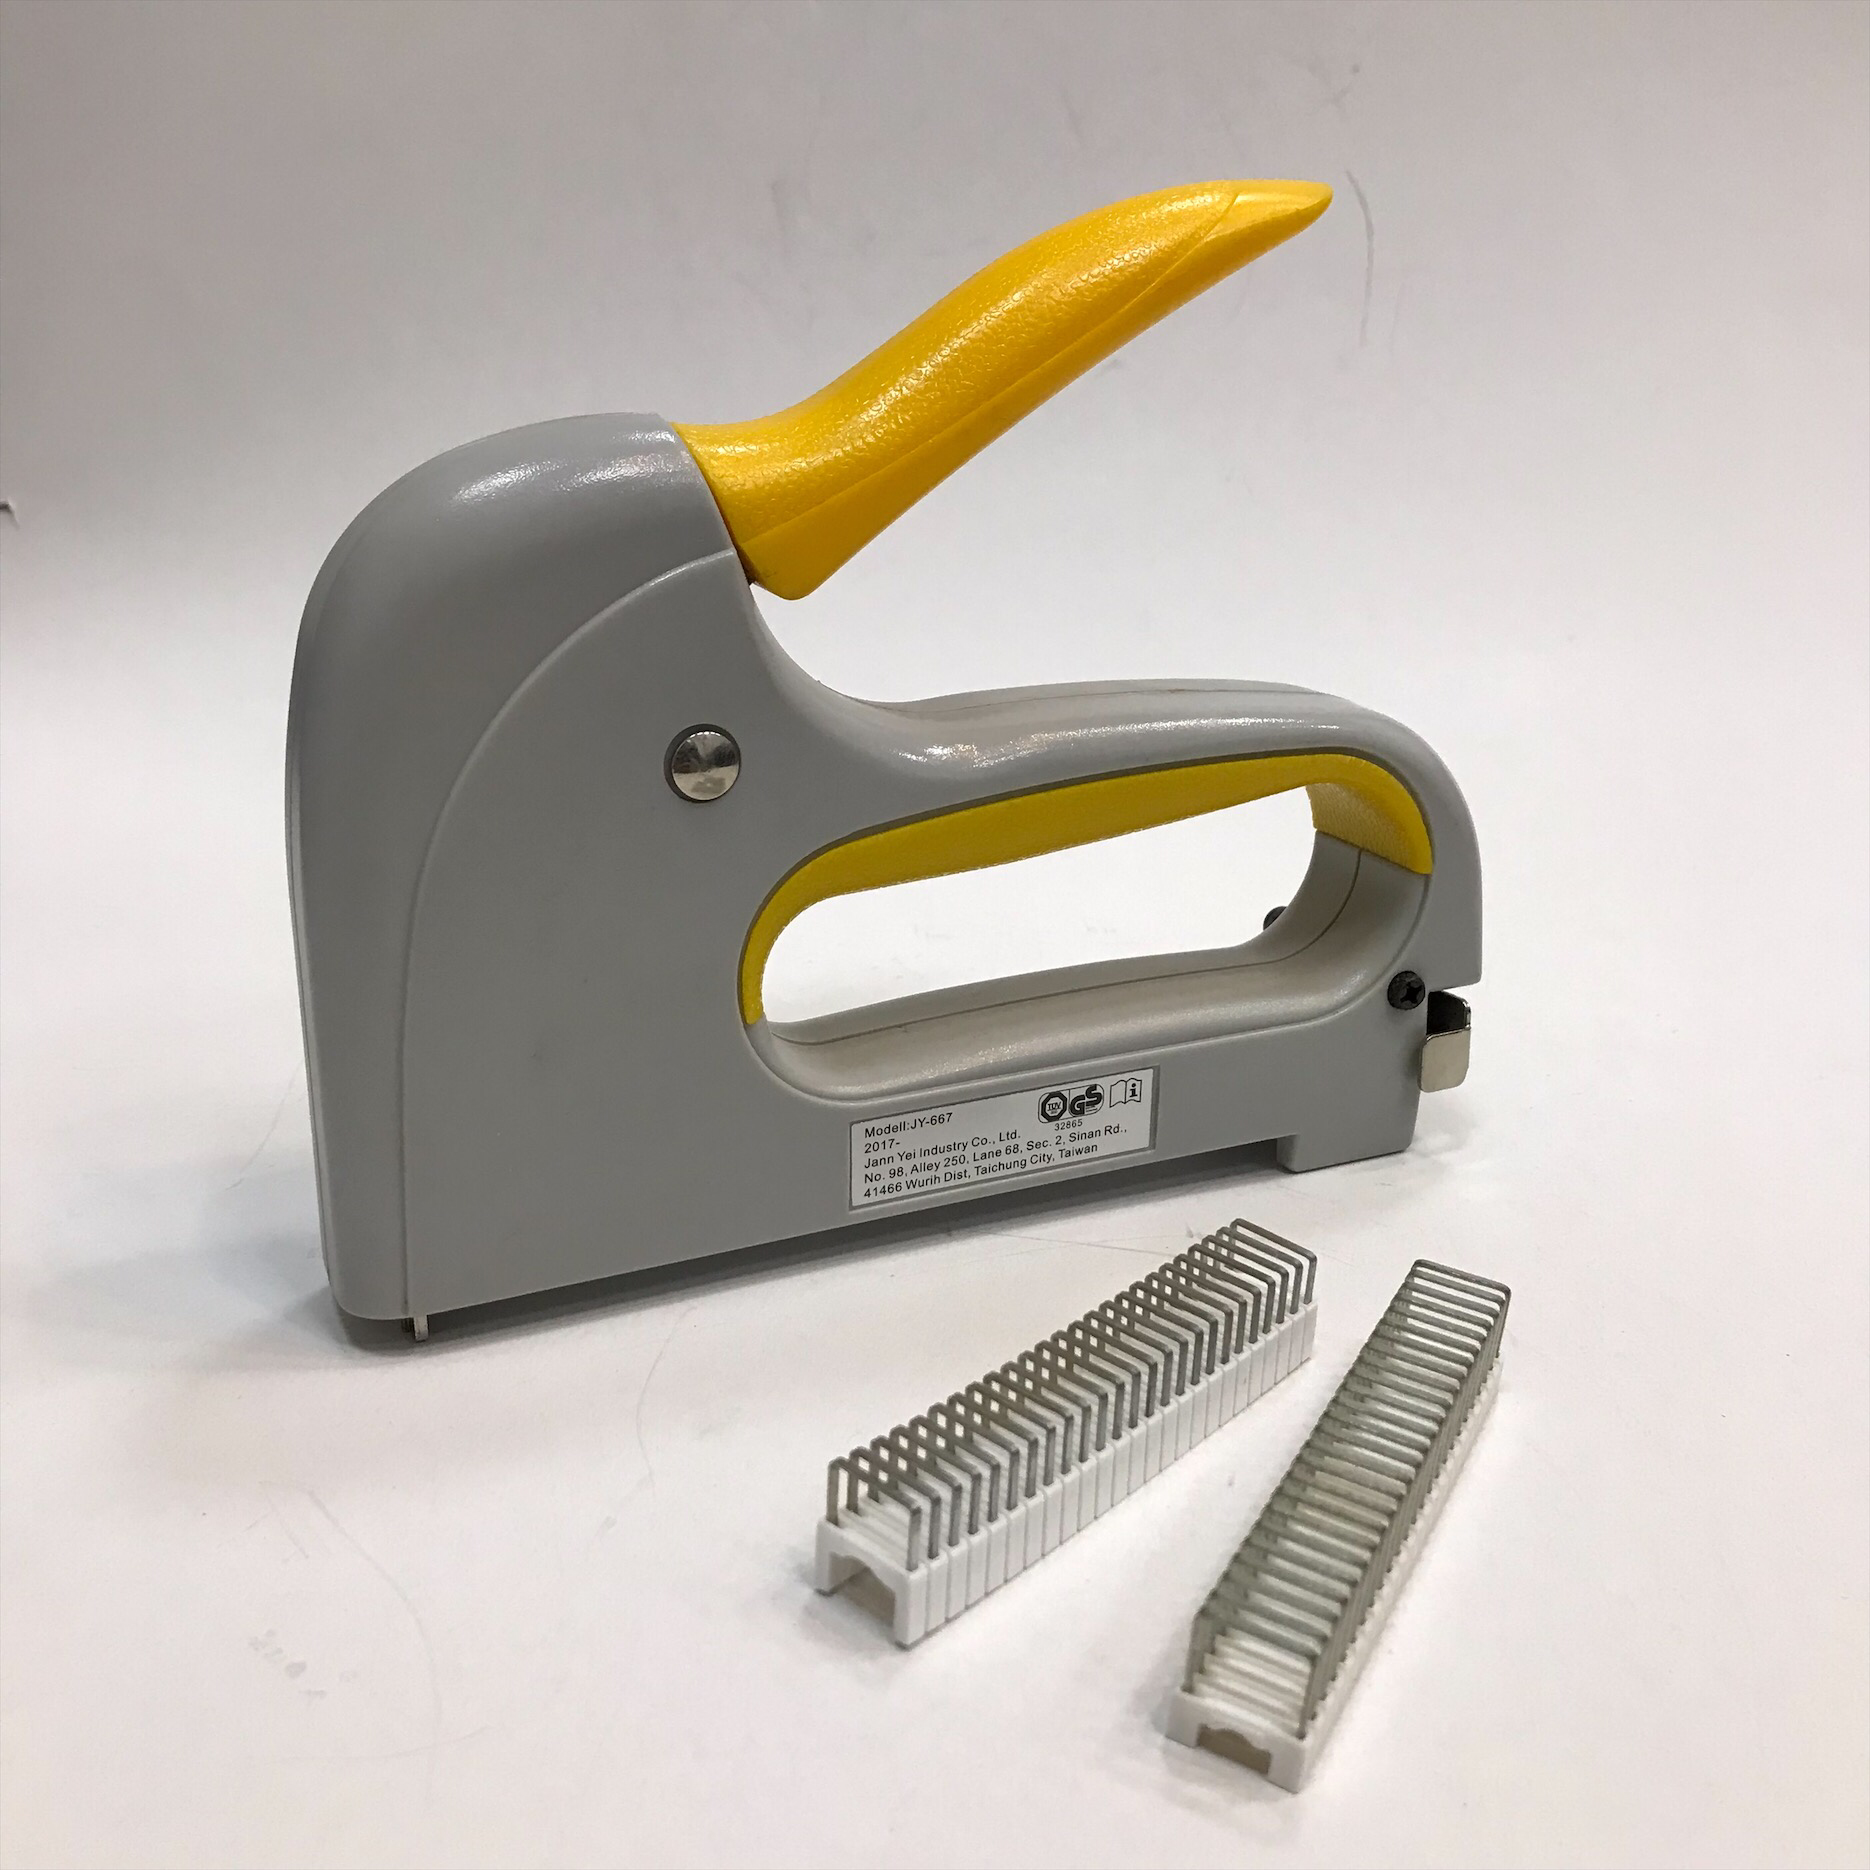 2 in 1 GS Certificated Cable Staple Gun For Wood